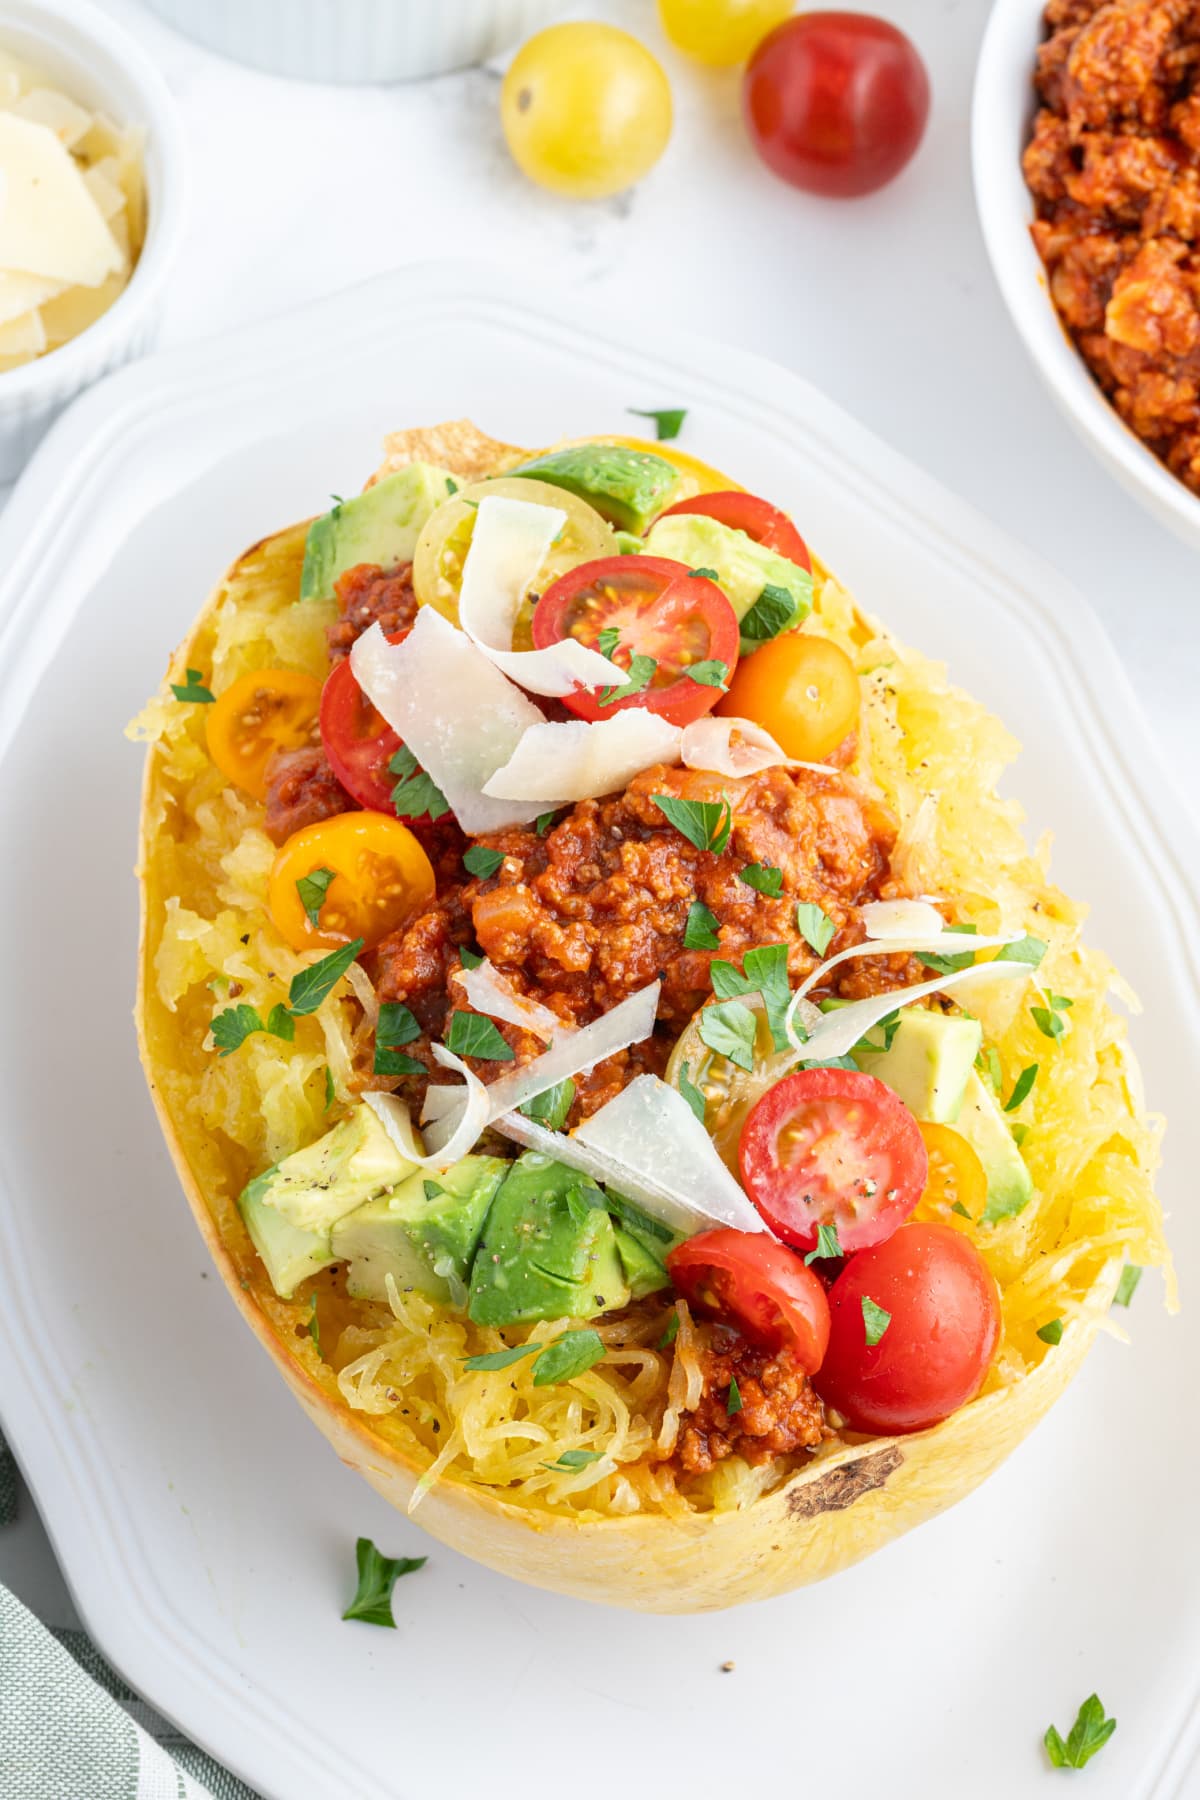 spaghetti squash filled with spicy meat sauce and garnishes